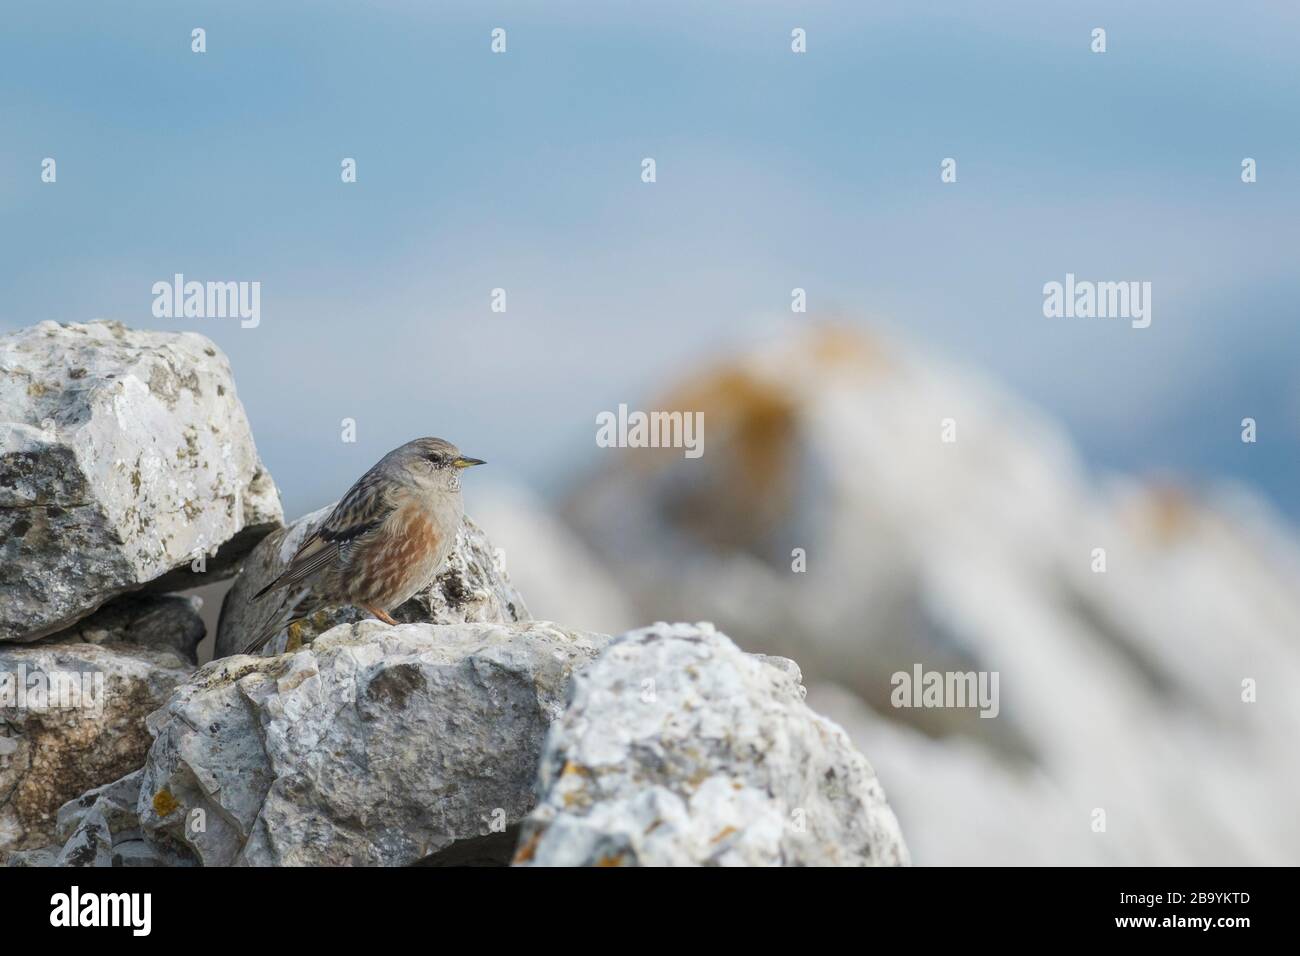 Alpine Accentor (Prunella collaris) perched on rocks. Els Ports Natural Park. Catalonia. Spain. Stock Photo